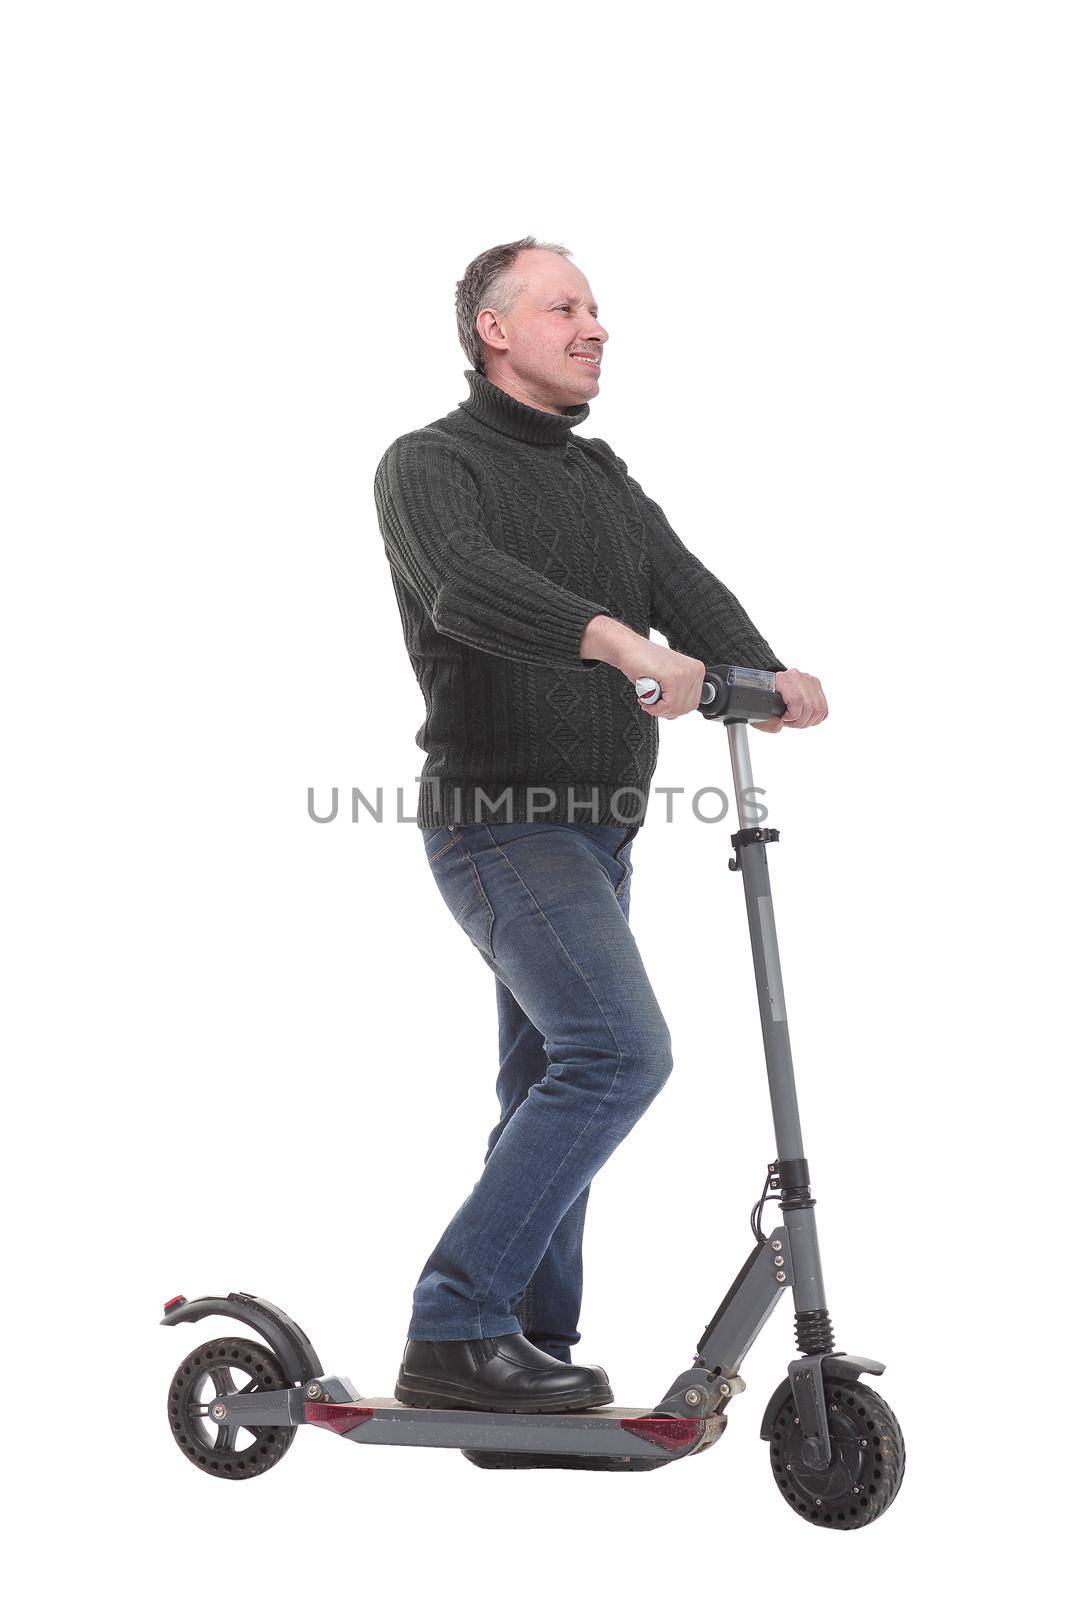 Side view of young modern man using and driving electric isolated over white background. Modern and ecological transportation concept.